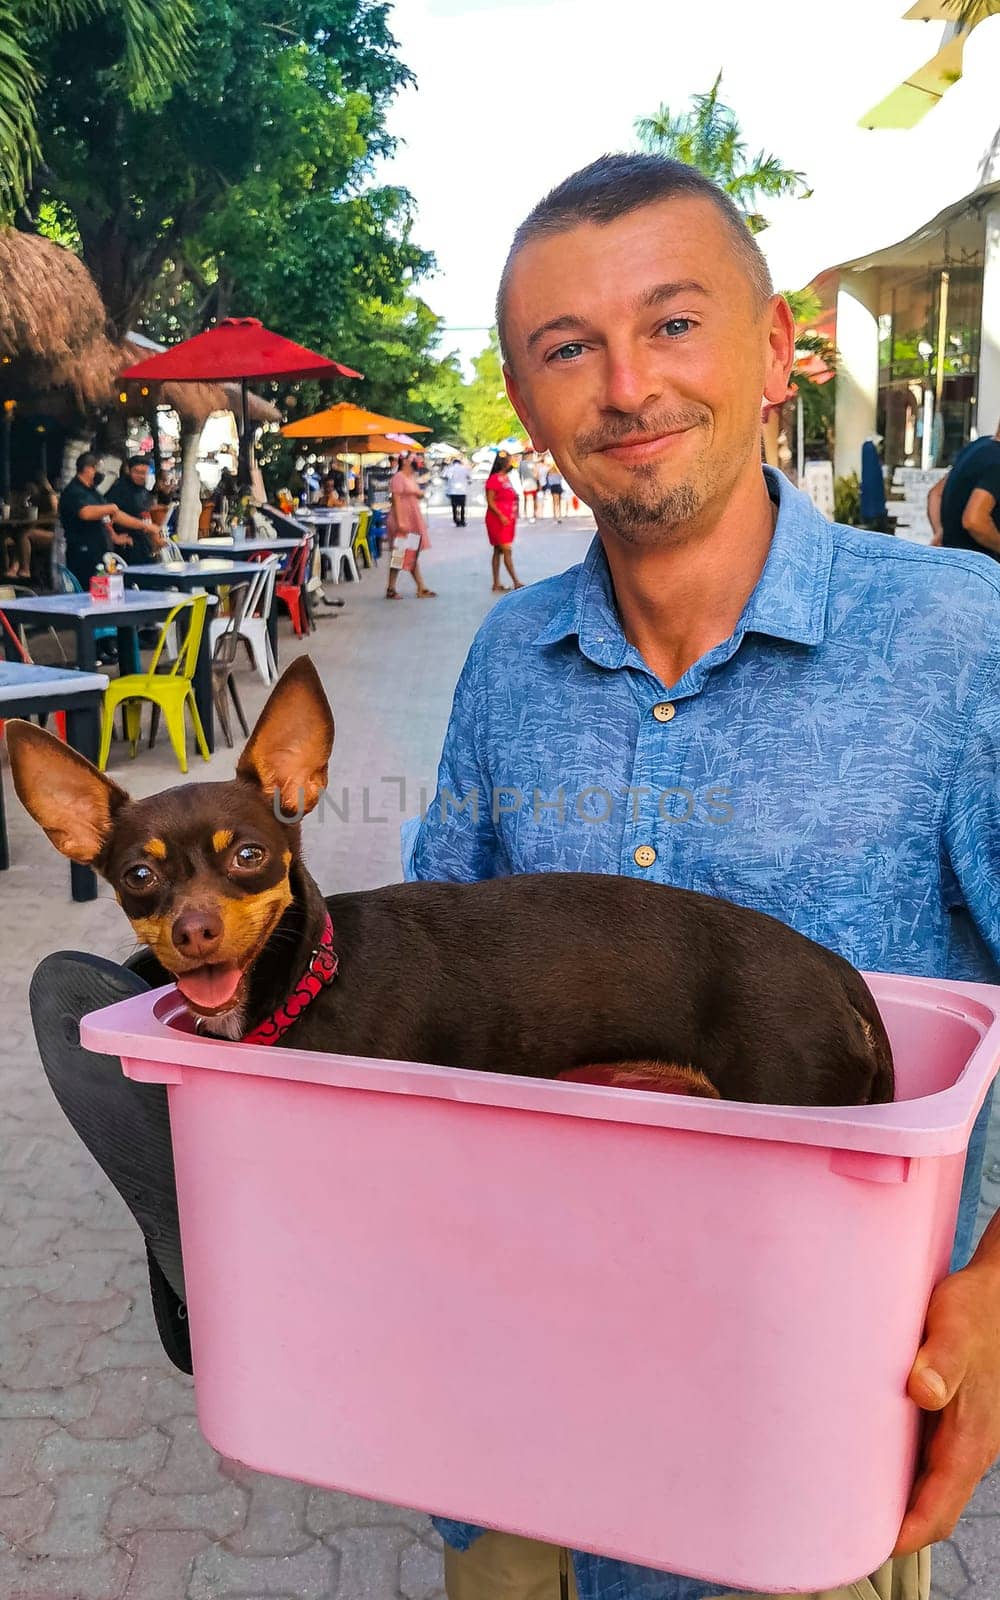 Happy man with dog in a pink box in Playa del Carmen Mexico. by Arkadij